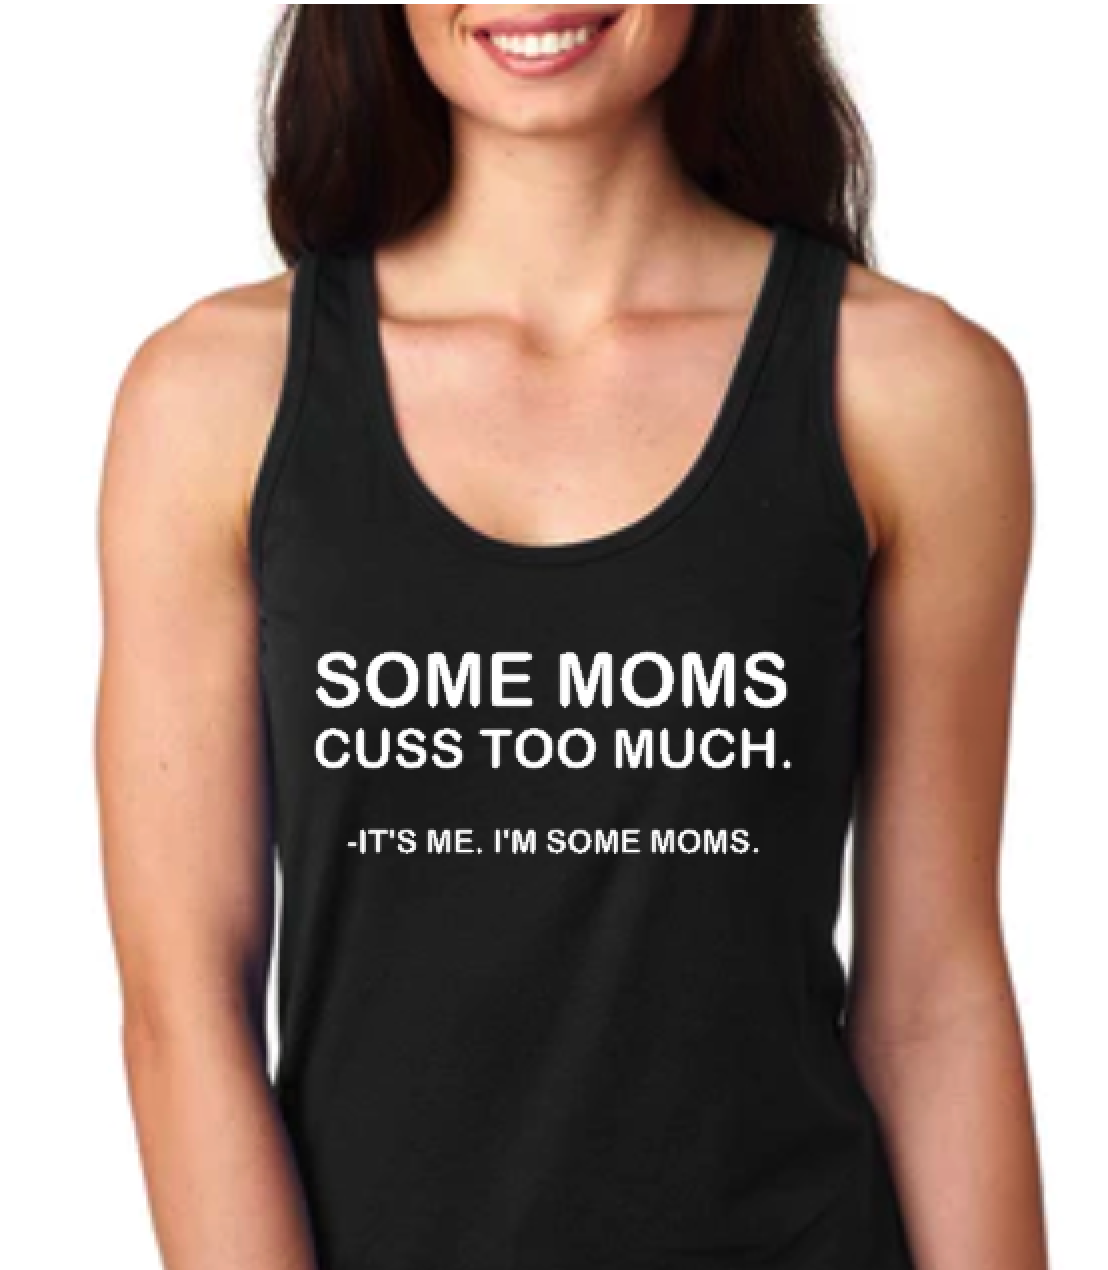 Some Moms Cuss Too Much - Racerback Tank